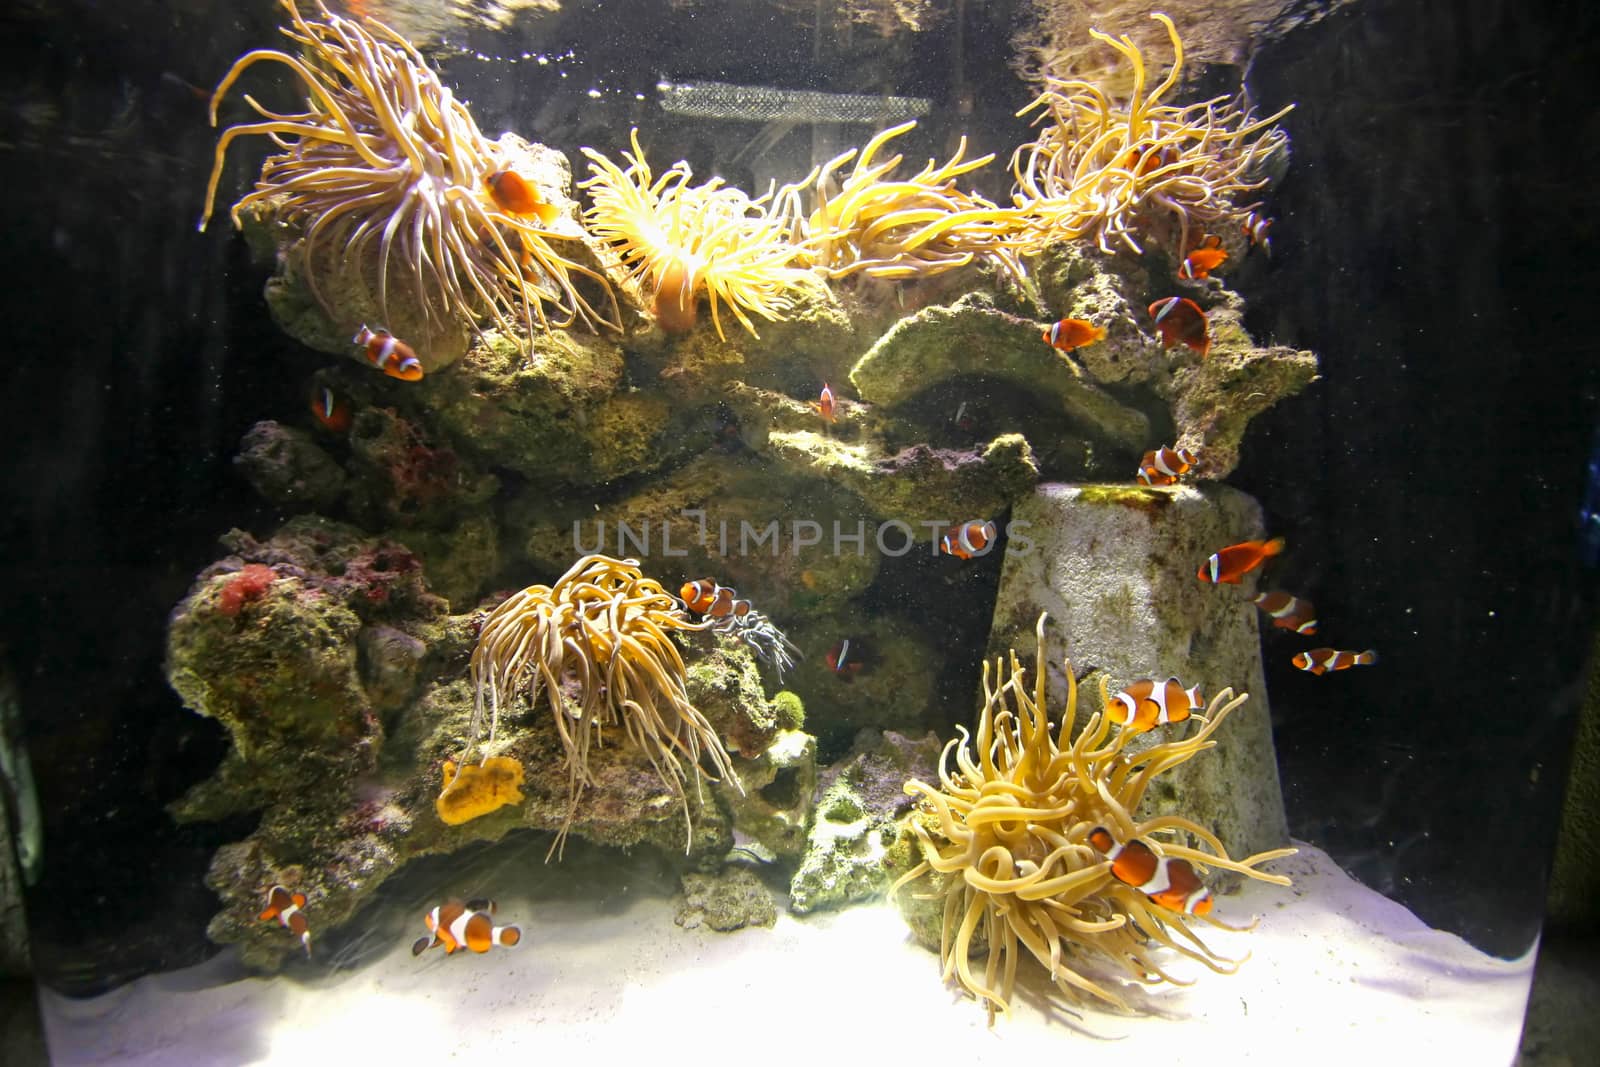 Many clownfish swimming through the water in a tank